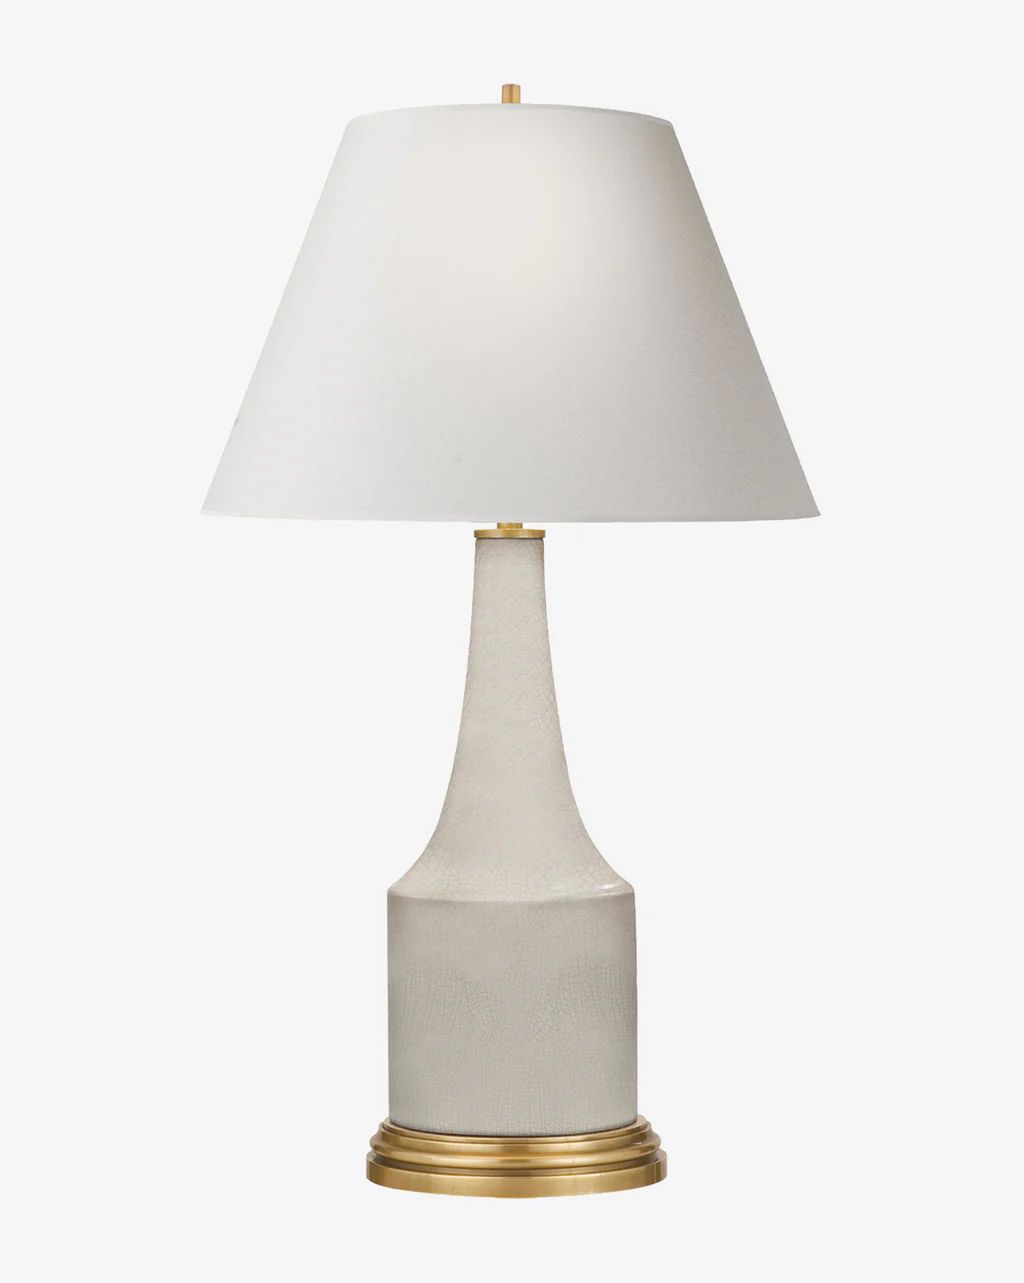 Sawyer Table Lamp | McGee & Co.